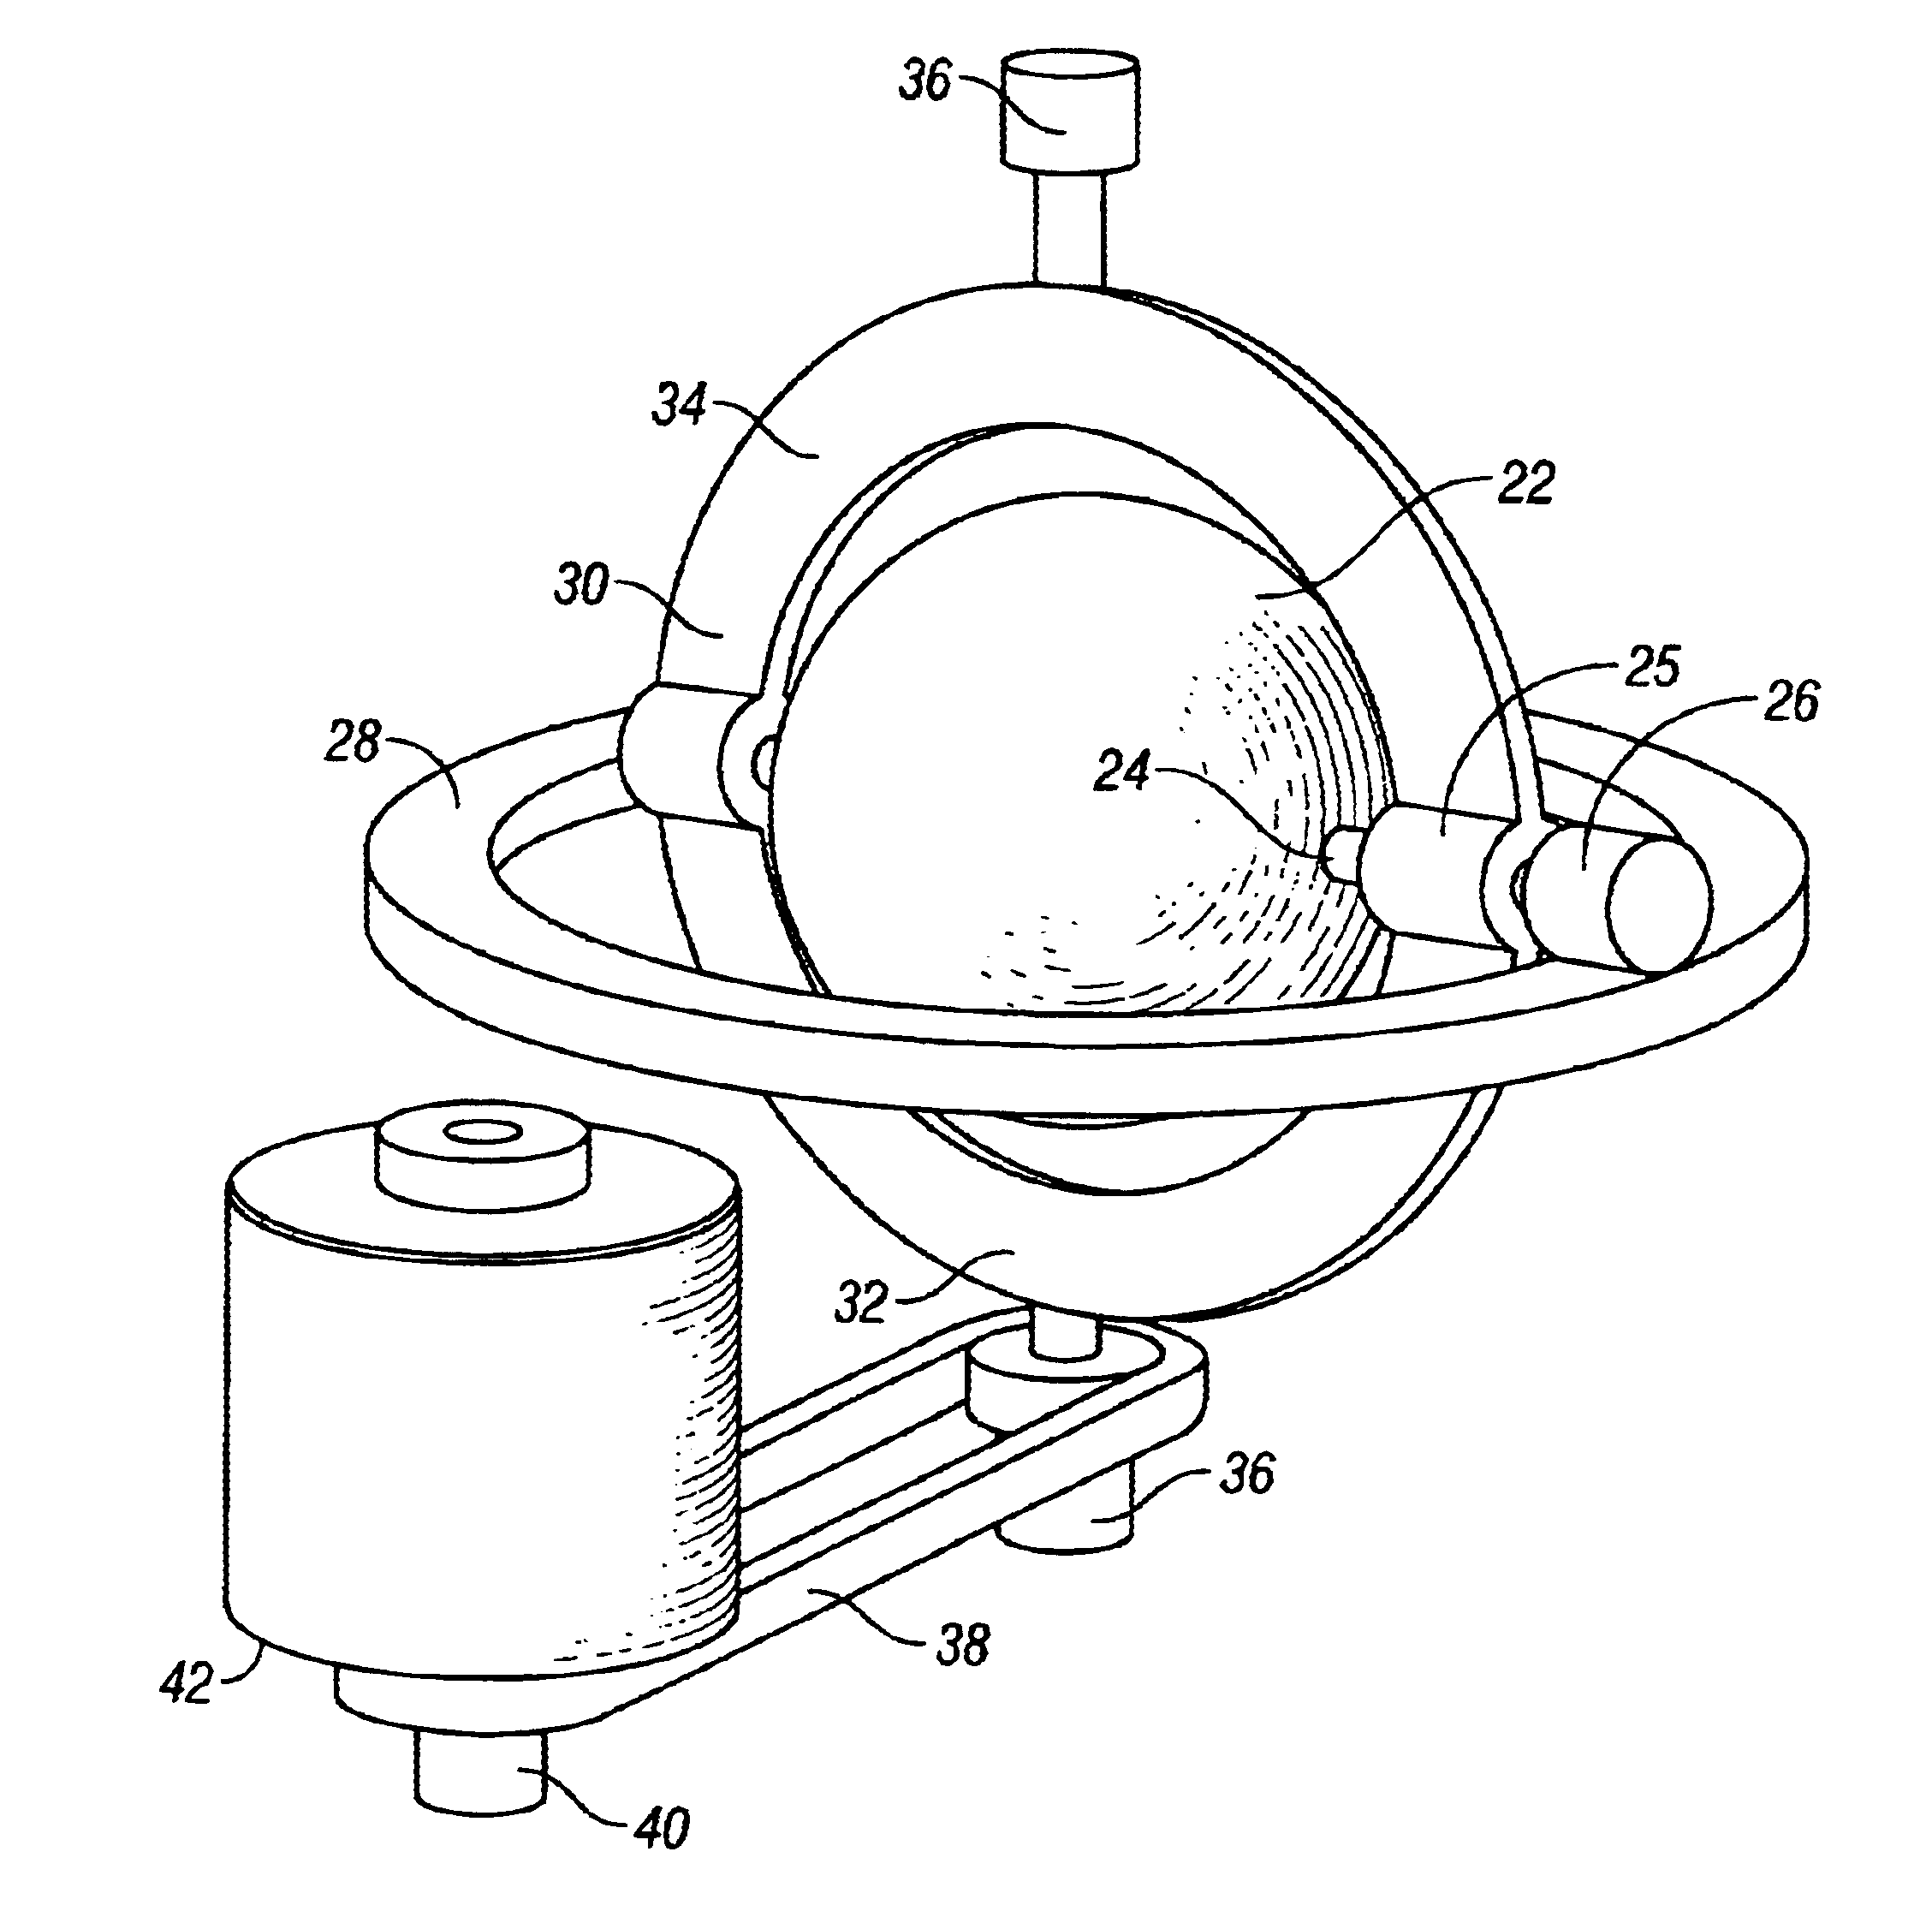 Bi-axial rotating magnetic therapeutic device